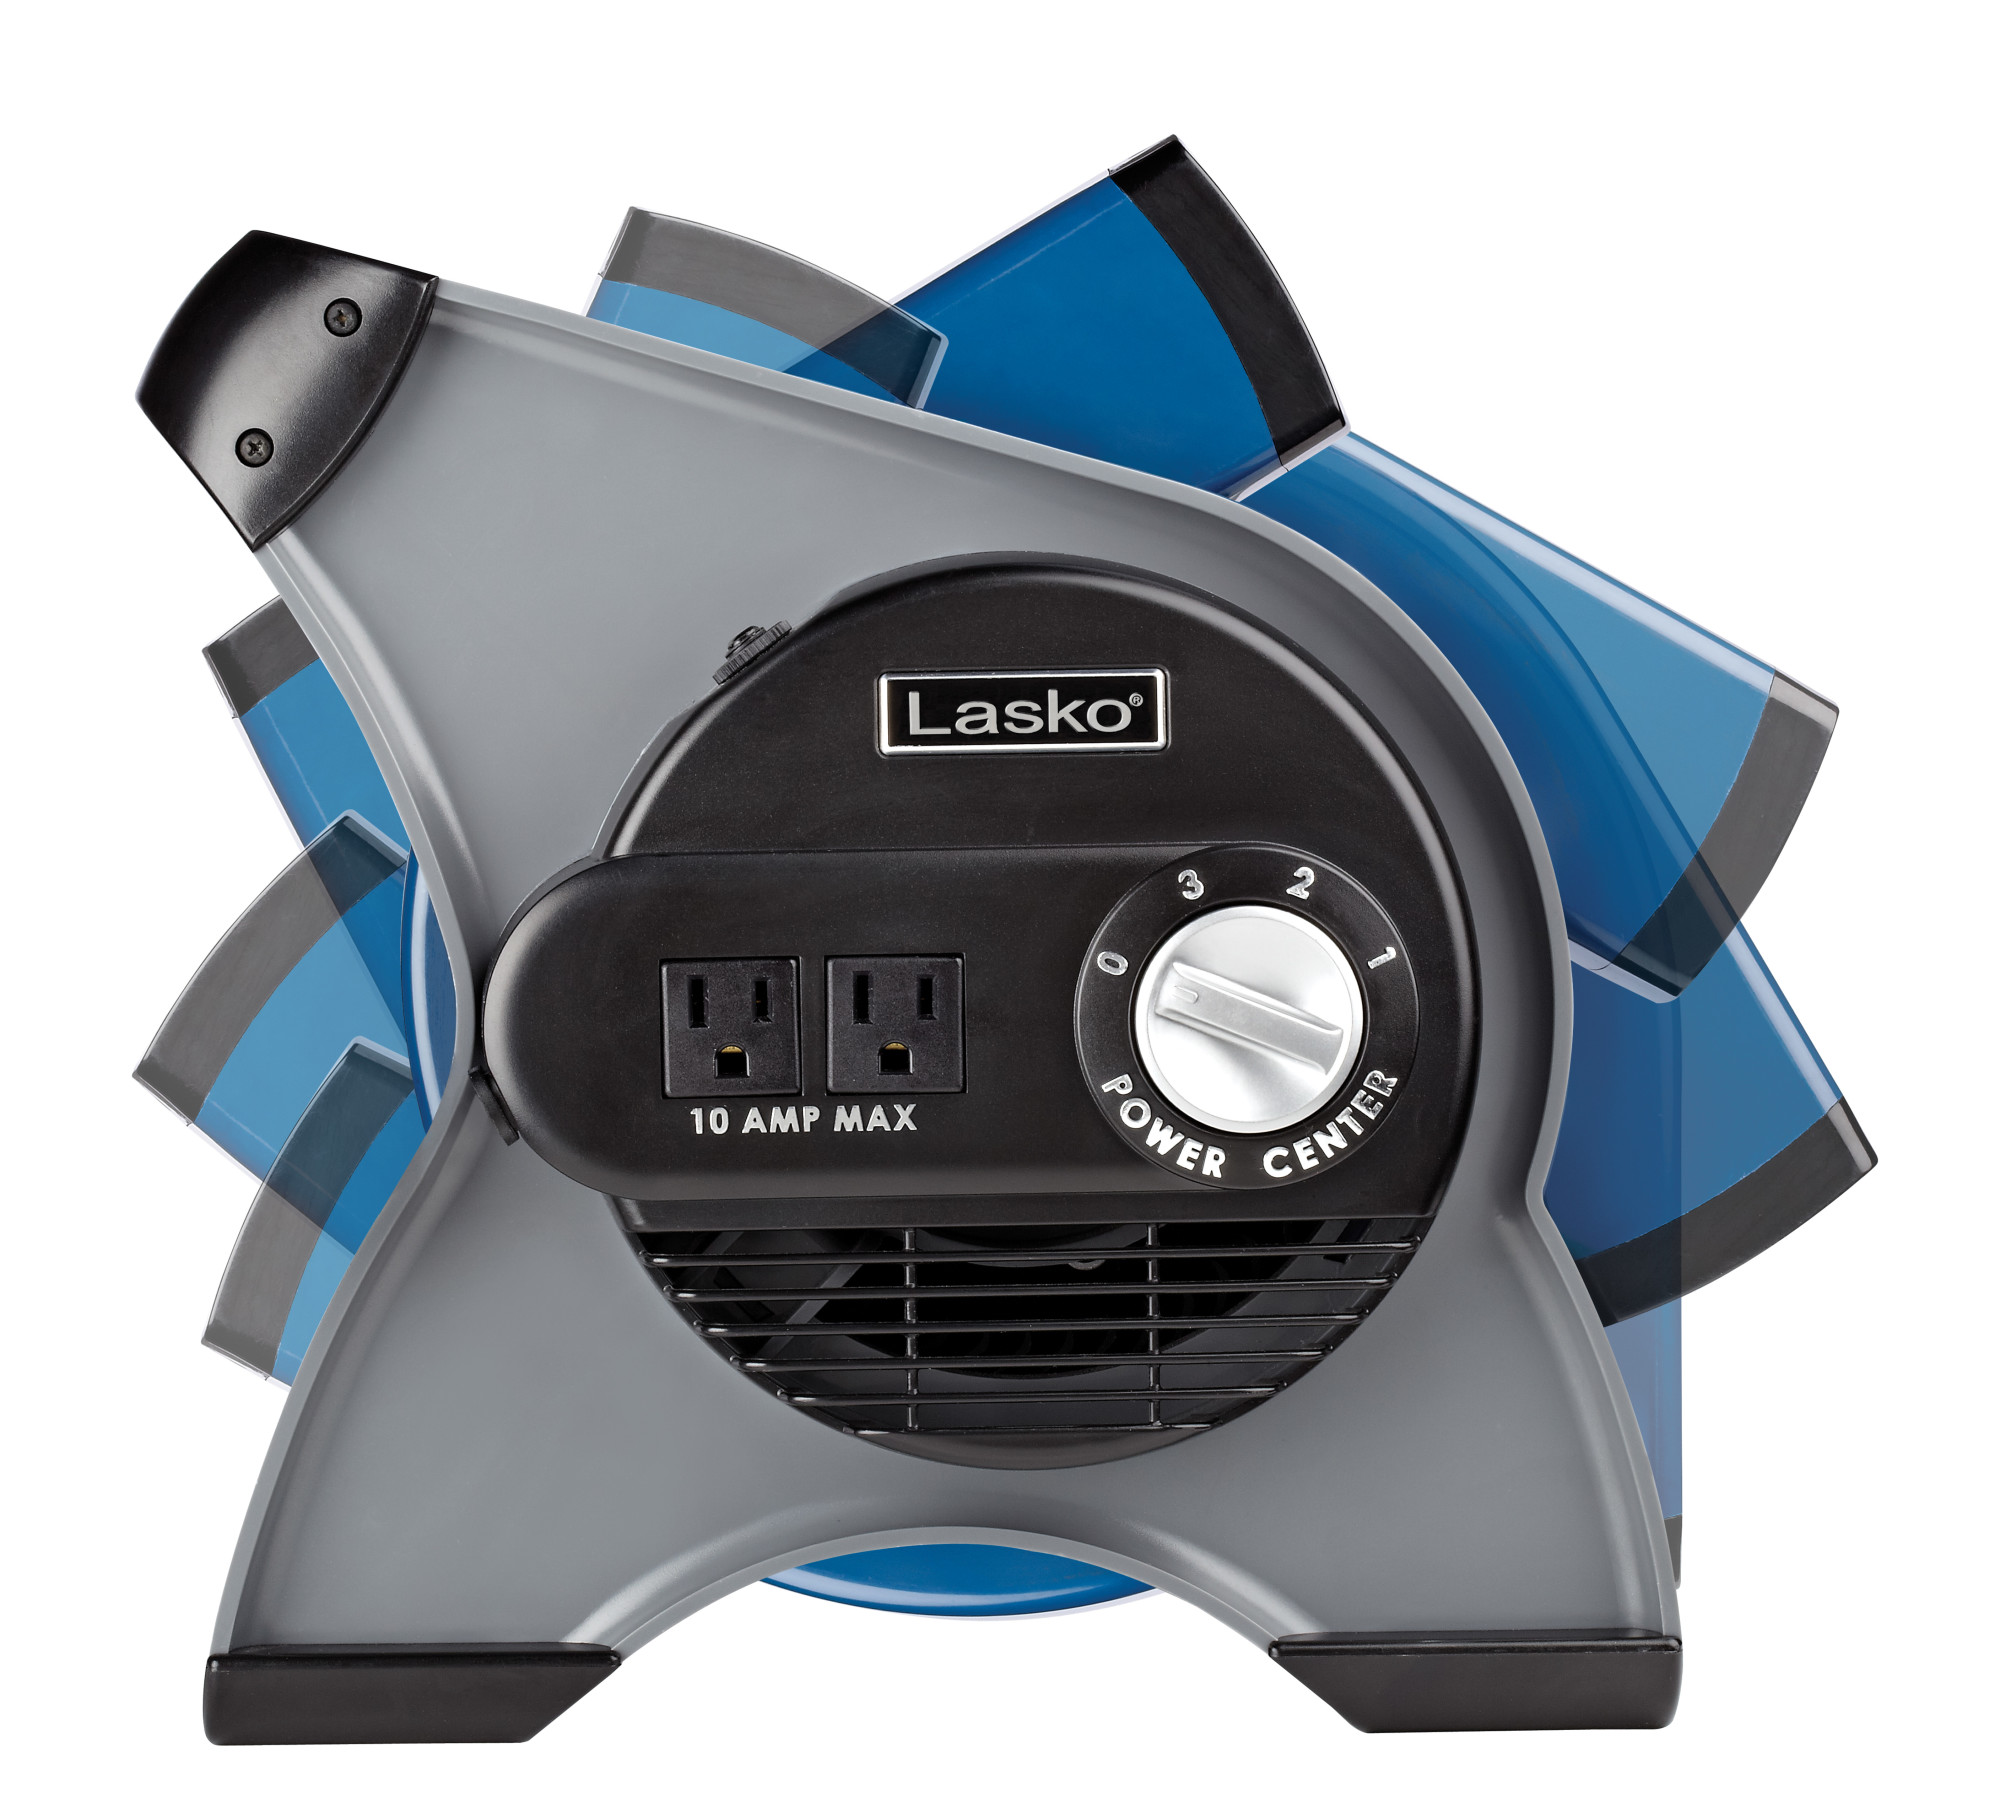 Lasko 11" 3-Speed Multi-Purpose Pivoting Utility Blower Fan with Outlets, Blue, U12100, New - image 3 of 3